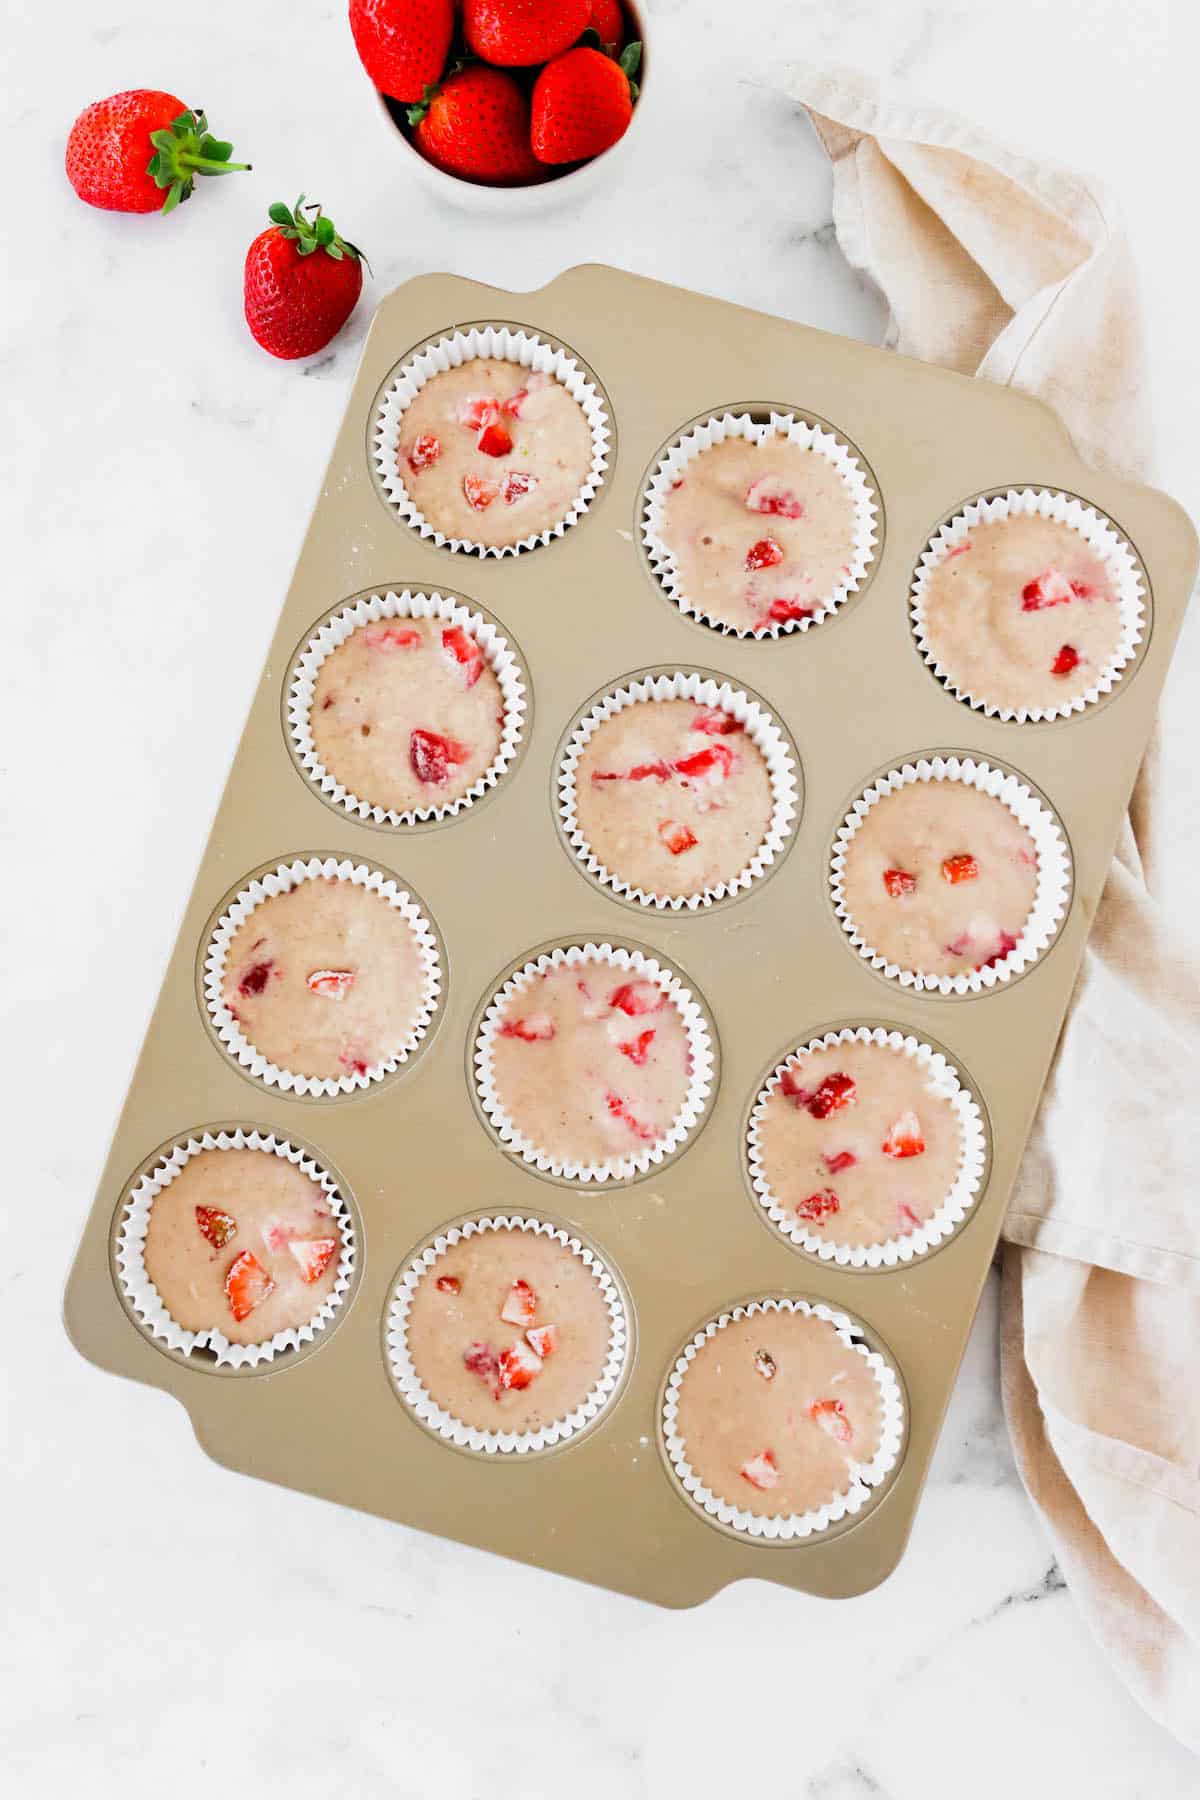 A muffin tin full of strawberry muffin batter